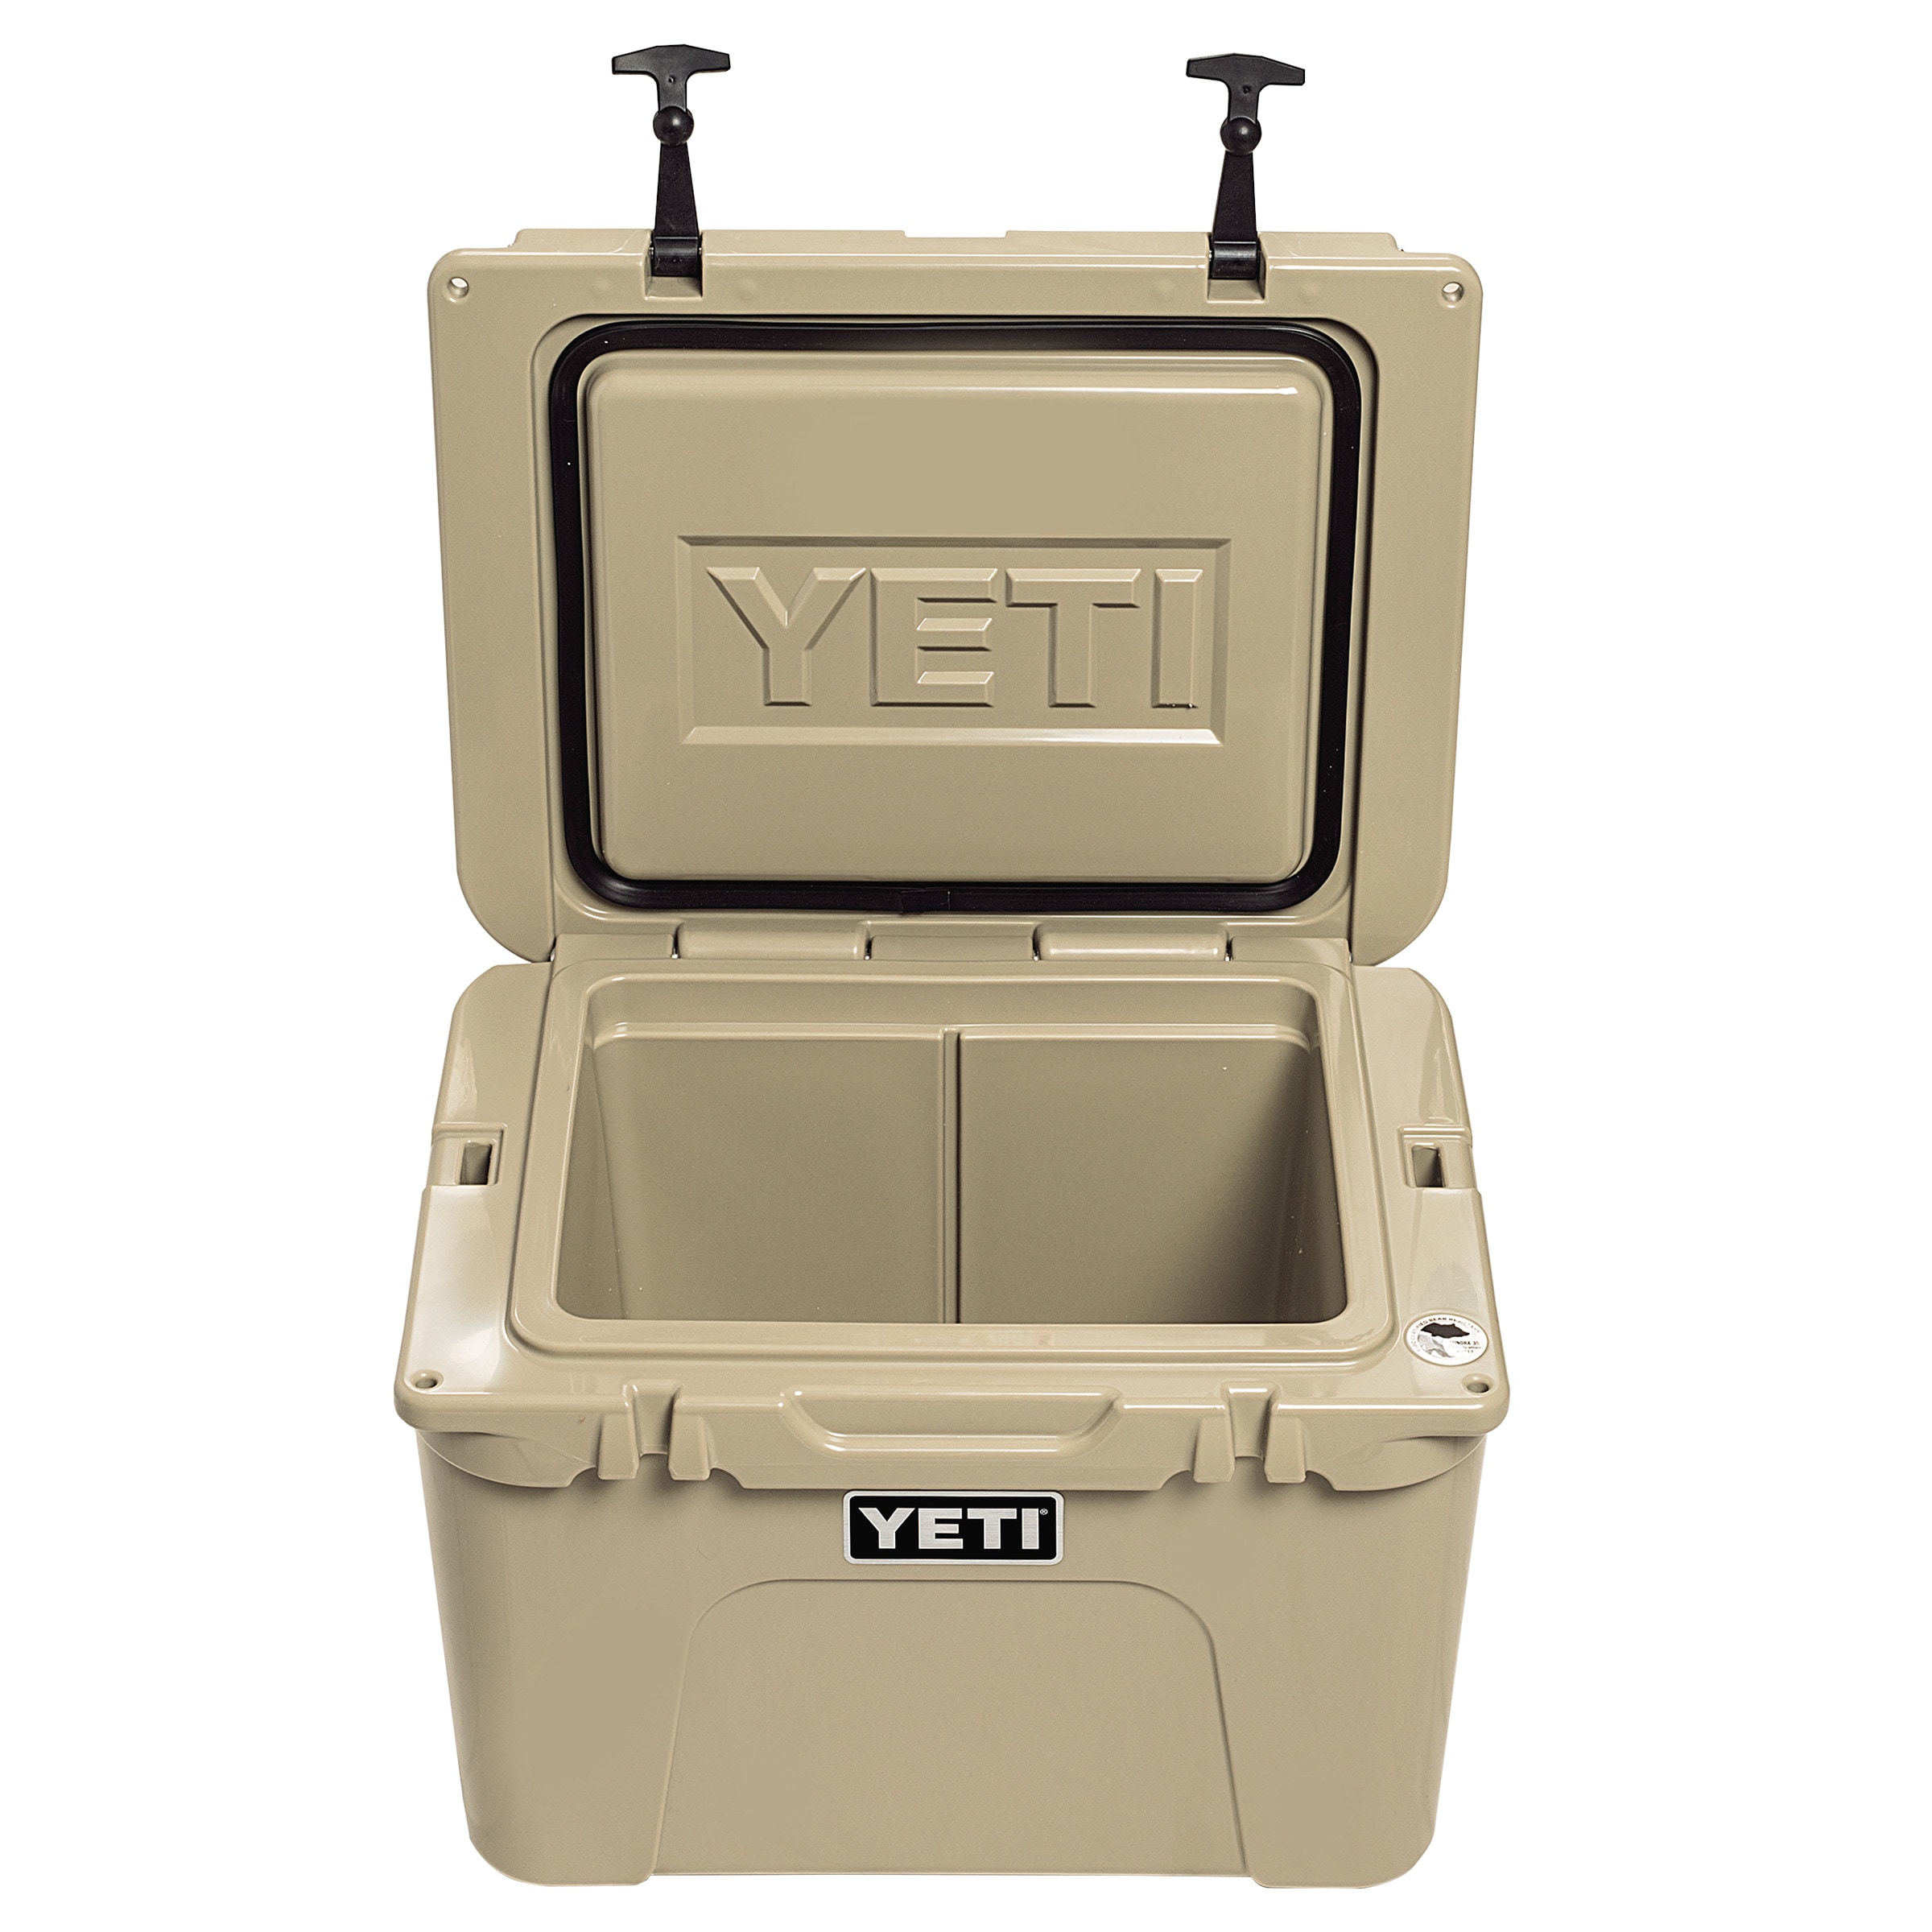 YETI 35L cooler sea foam green - general for sale - by owner - craigslist